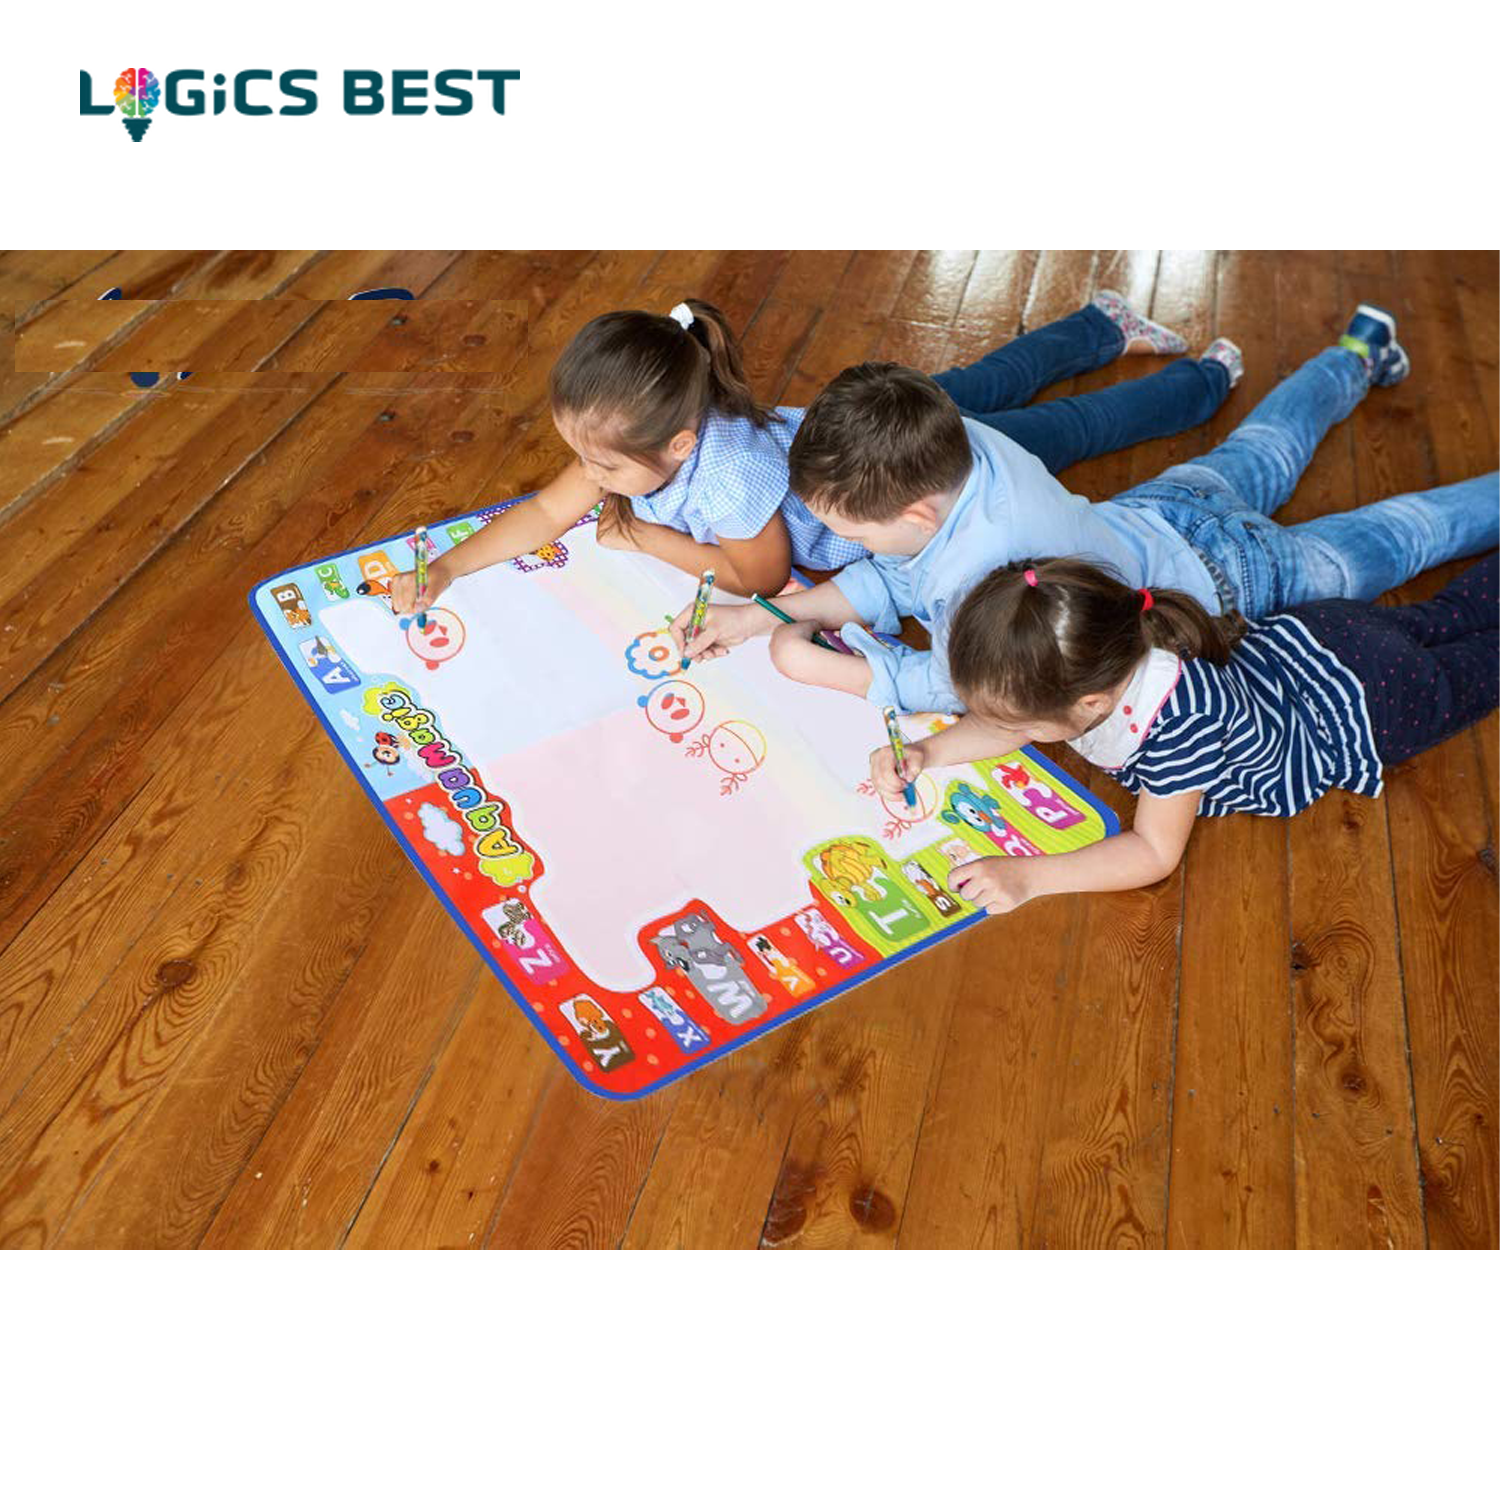 Logics Best Activity Mat for Learning- Premium Water Drawing Mat for K